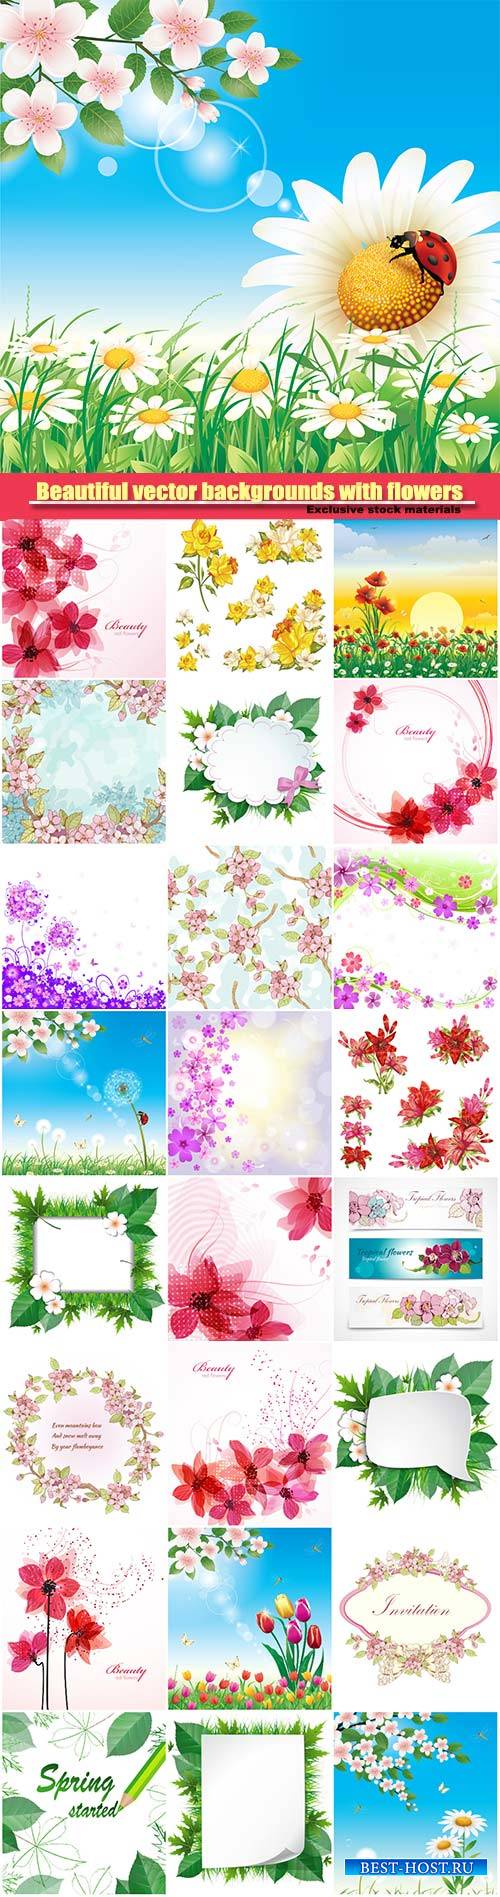 Beautiful vector backgrounds with different flowers